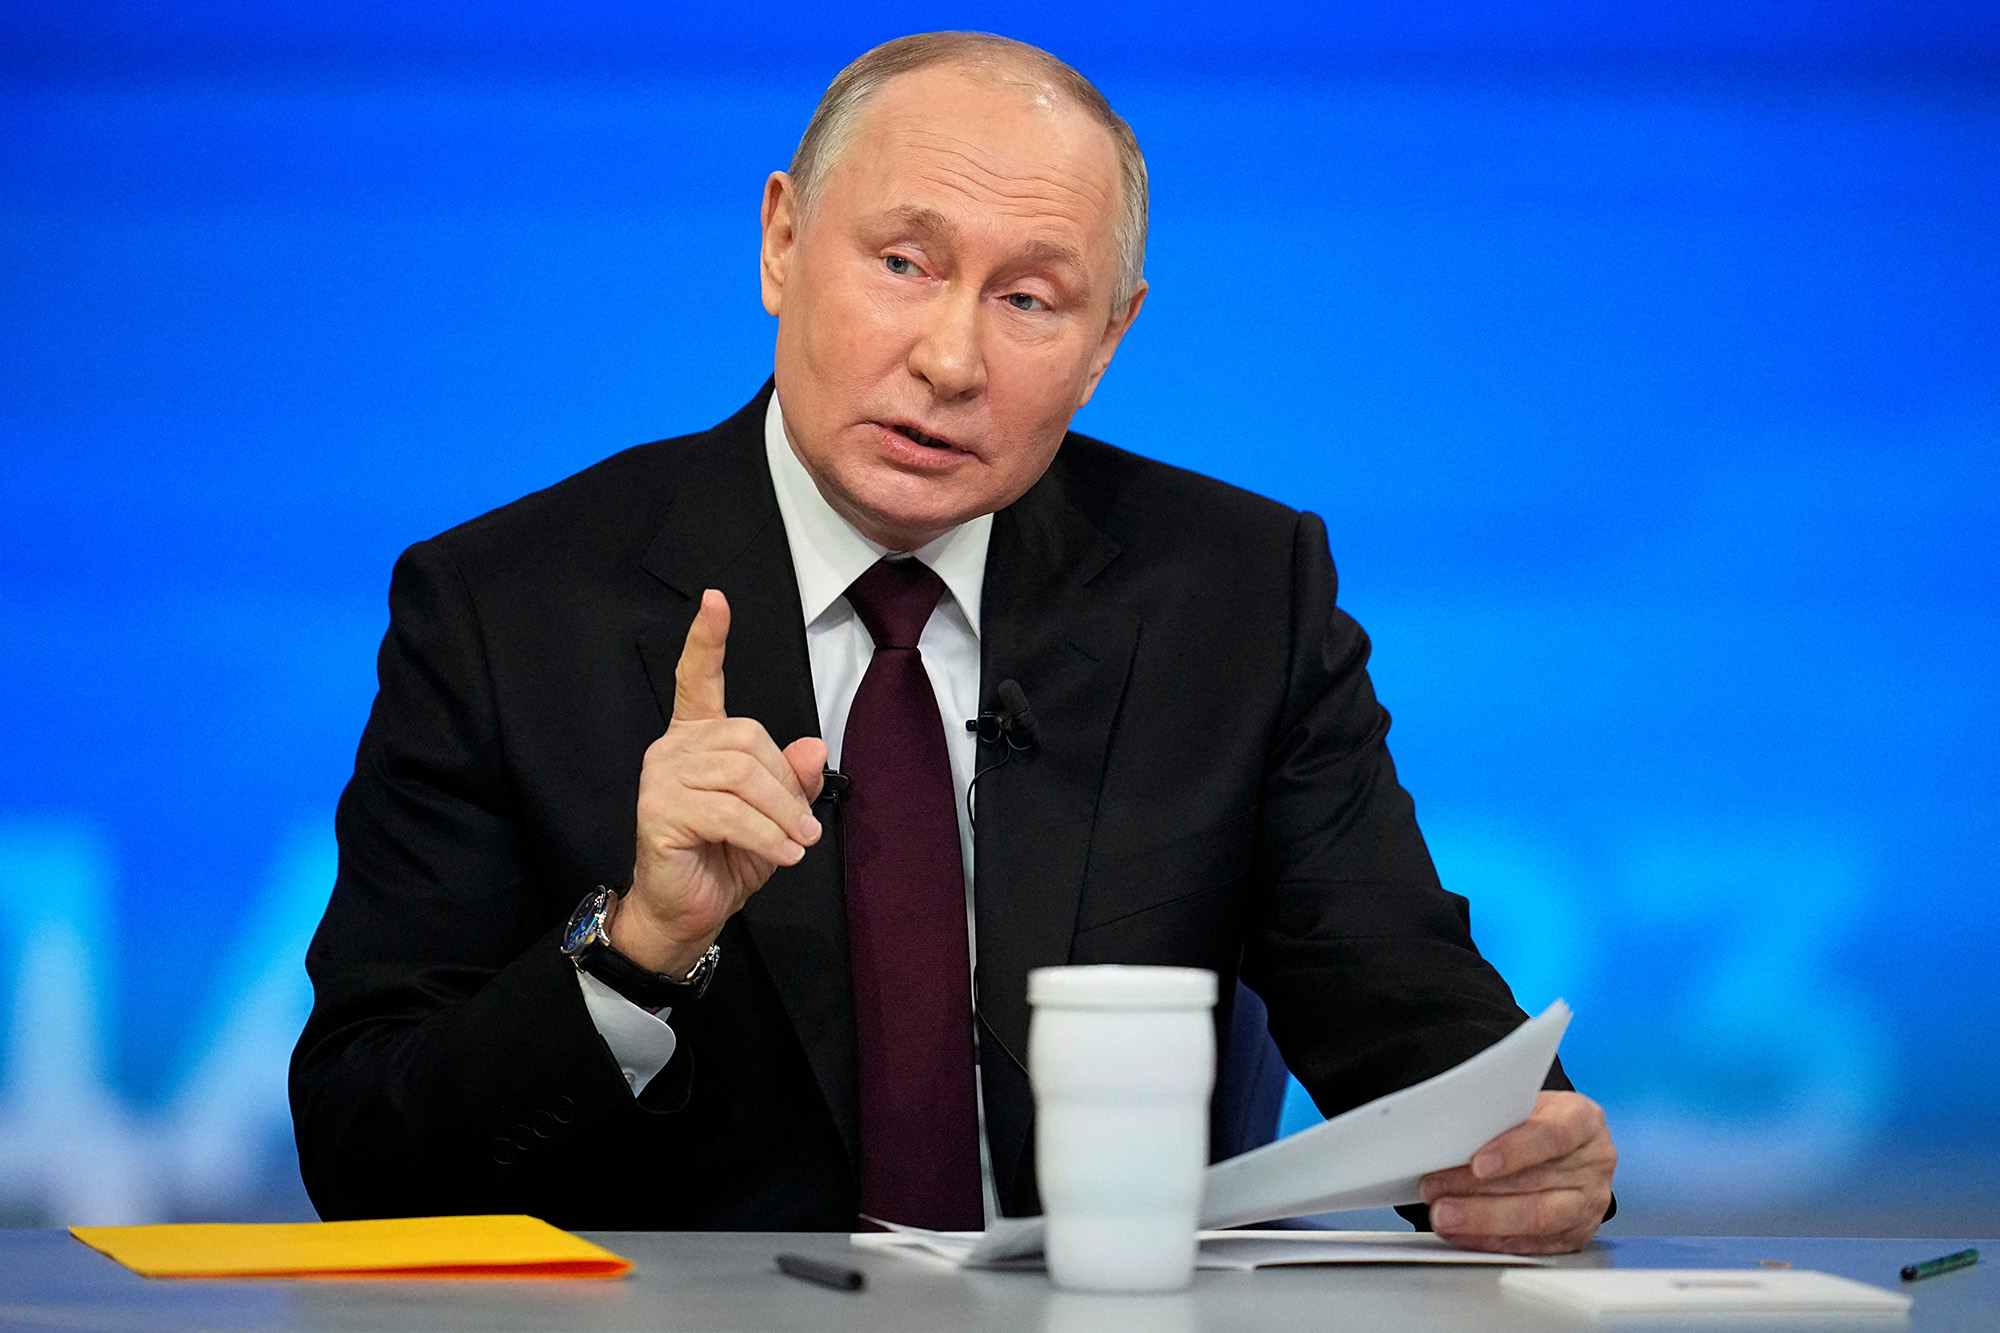 Russian President Vladimir Putin speaks during his annual press conference in Moscow, Russia, on December 14.